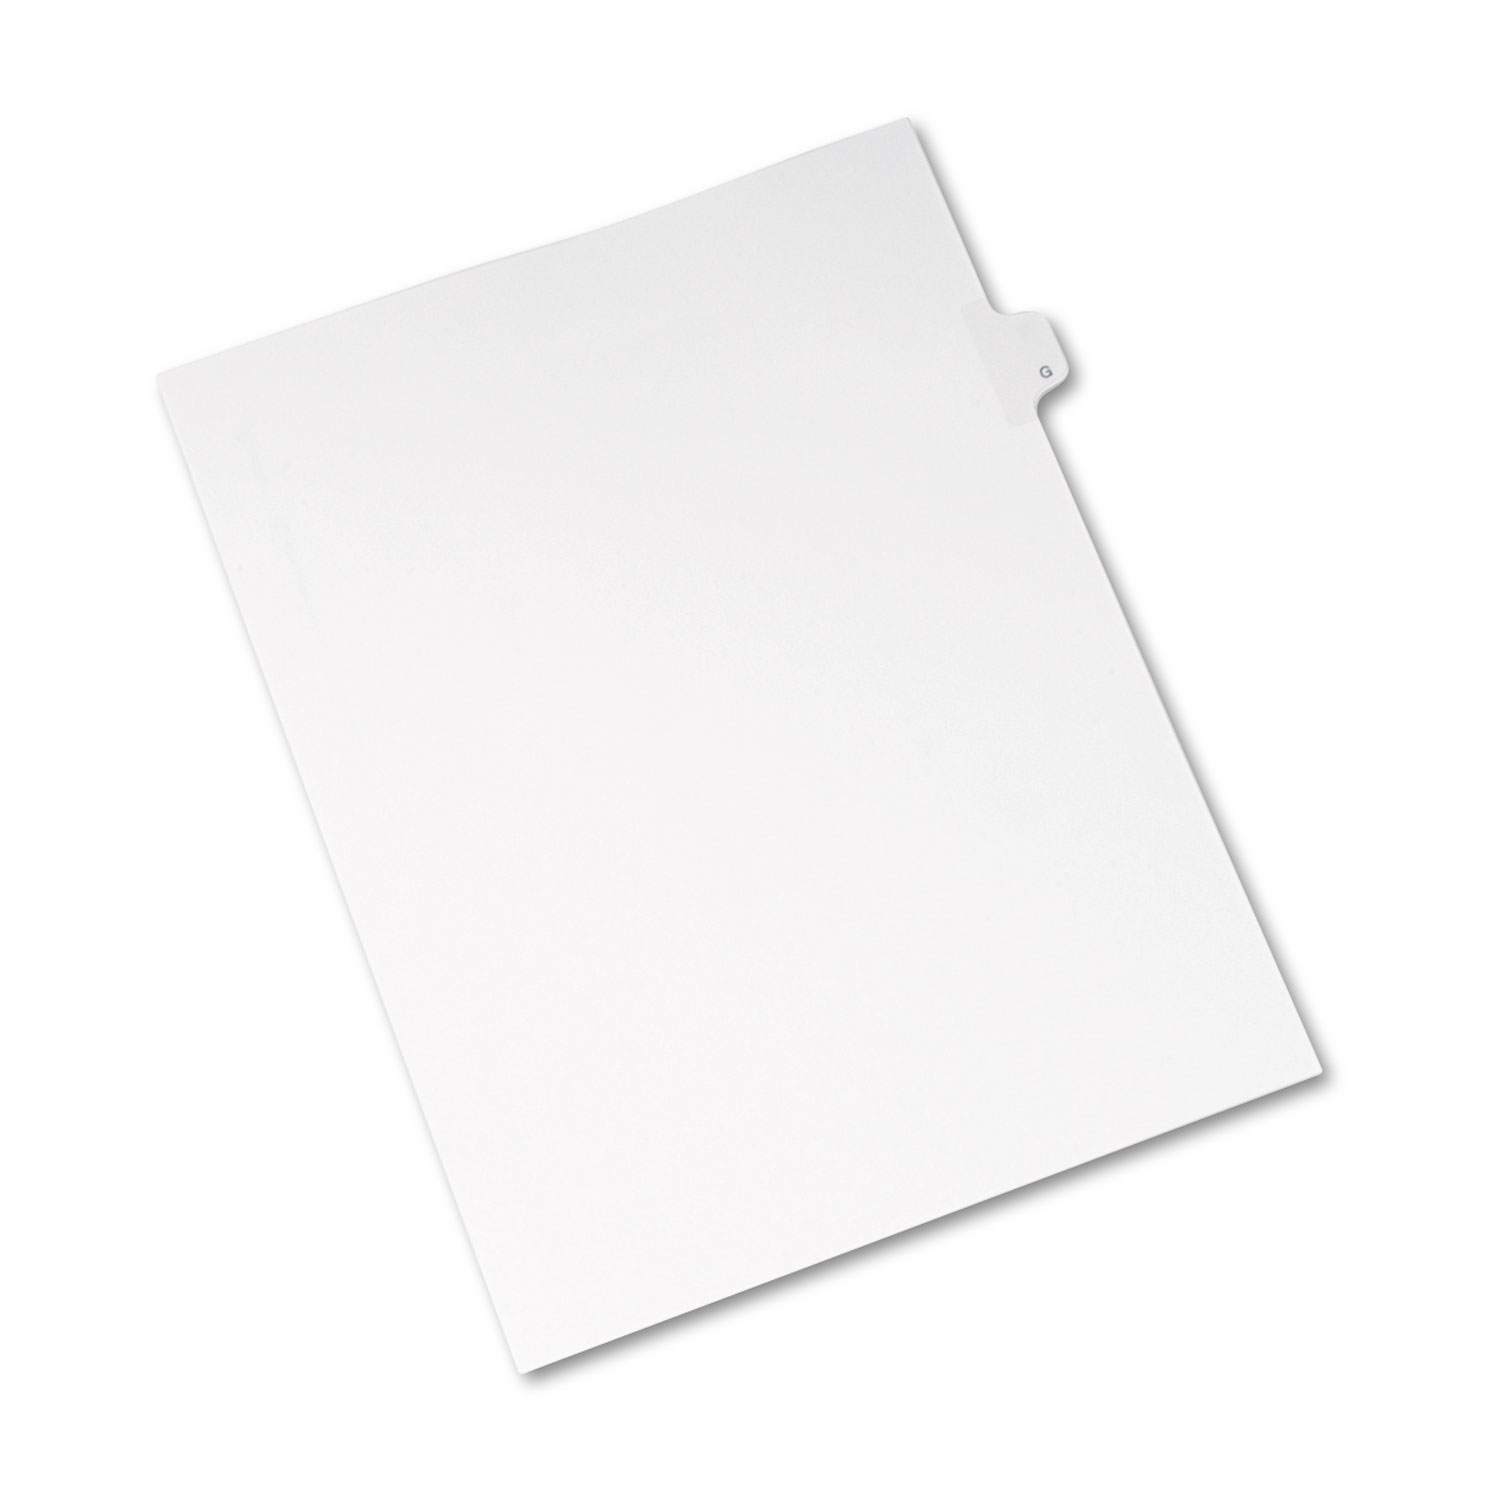 Allstate-Style Legal Exhibit Side Tab Divider, Title: G, Letter, White, 25/Pack